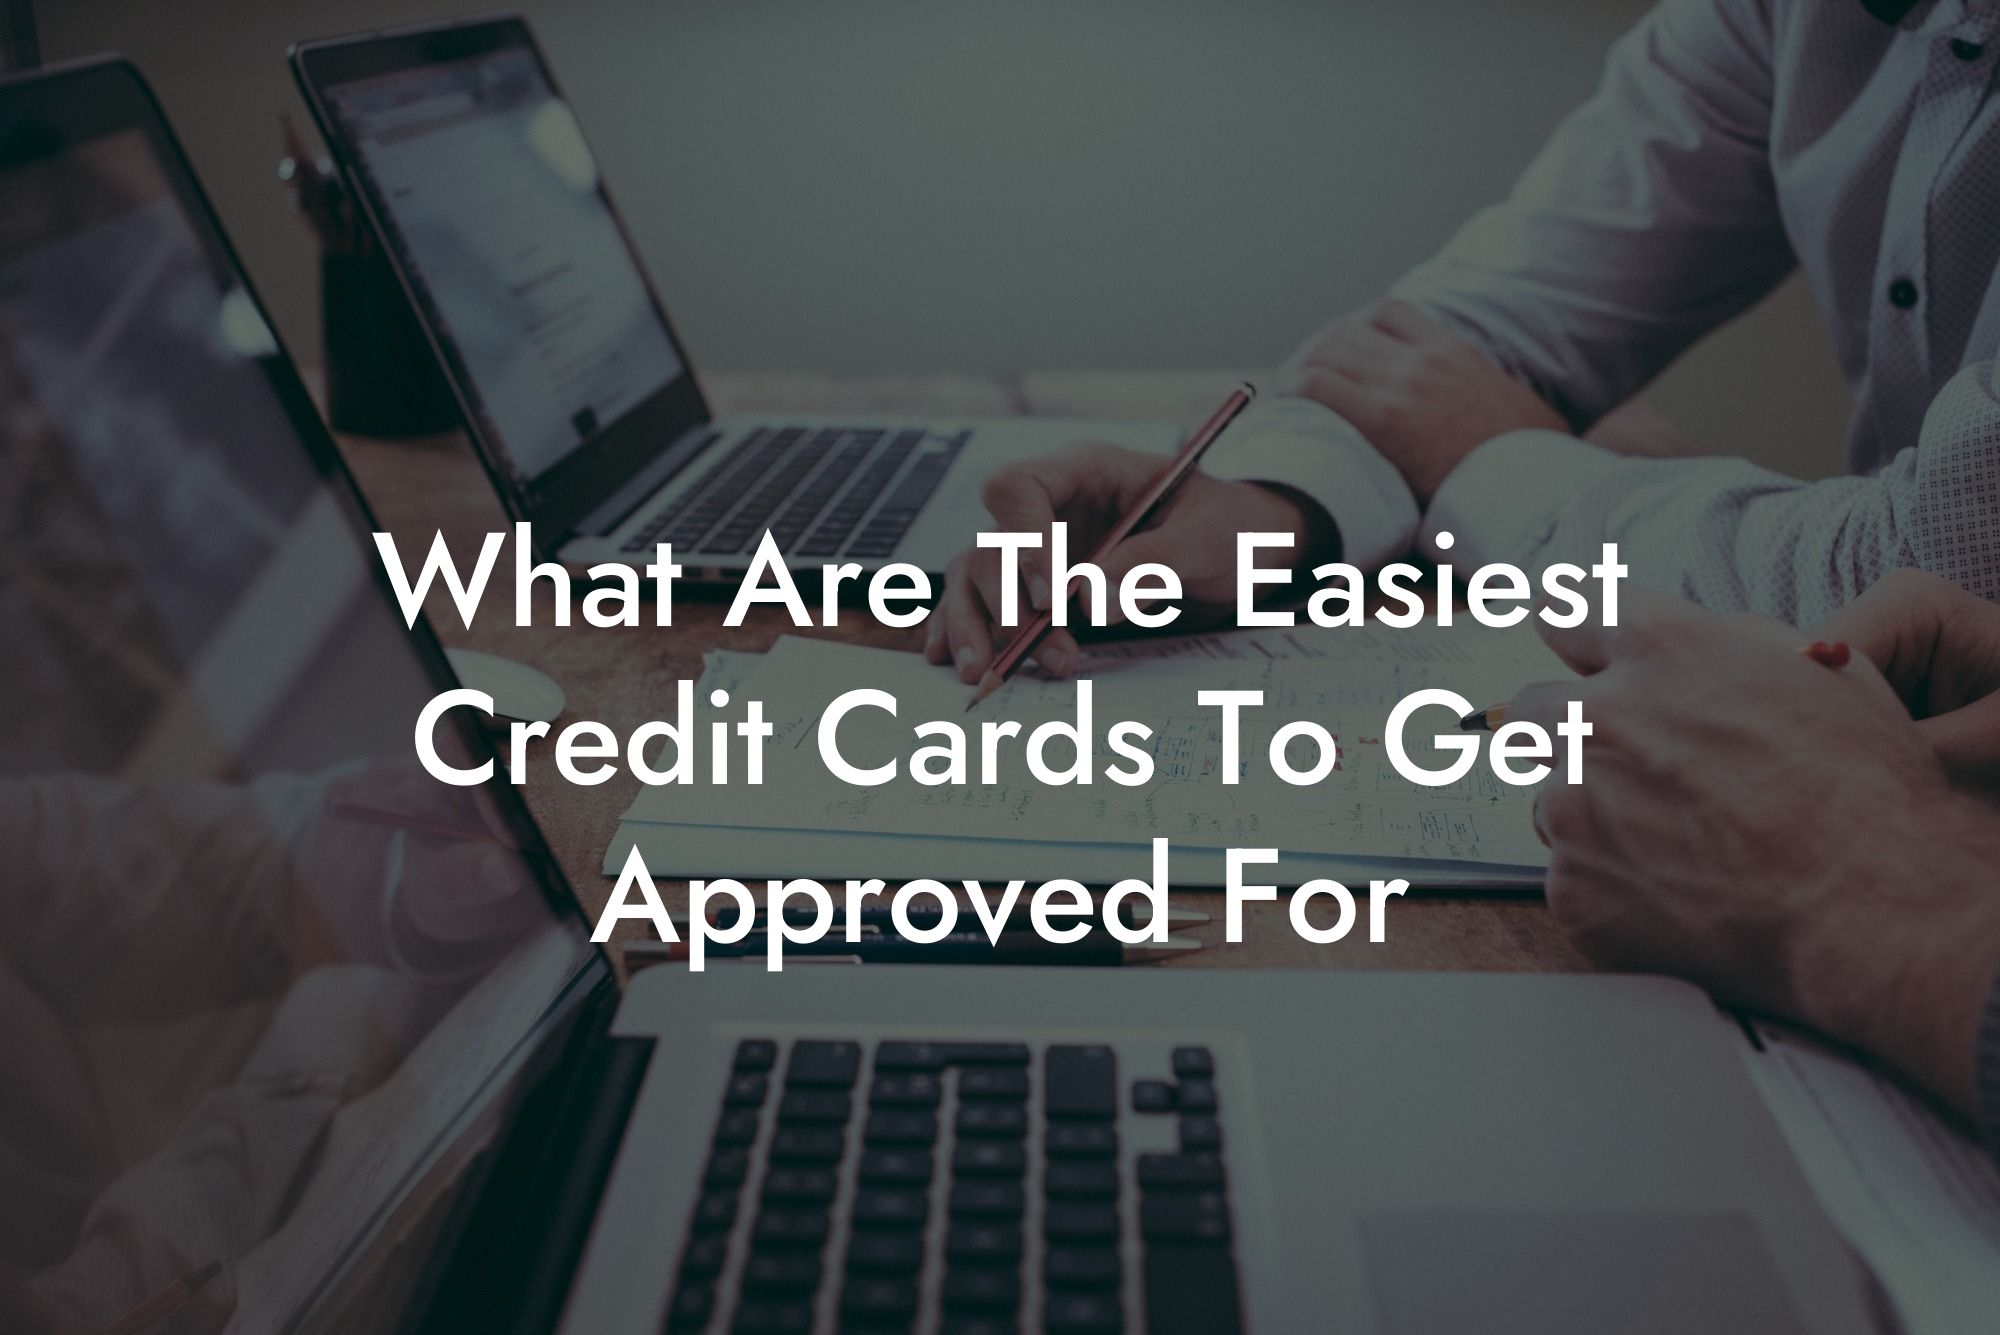 What Are The Easiest Credit Cards To Get Approved For